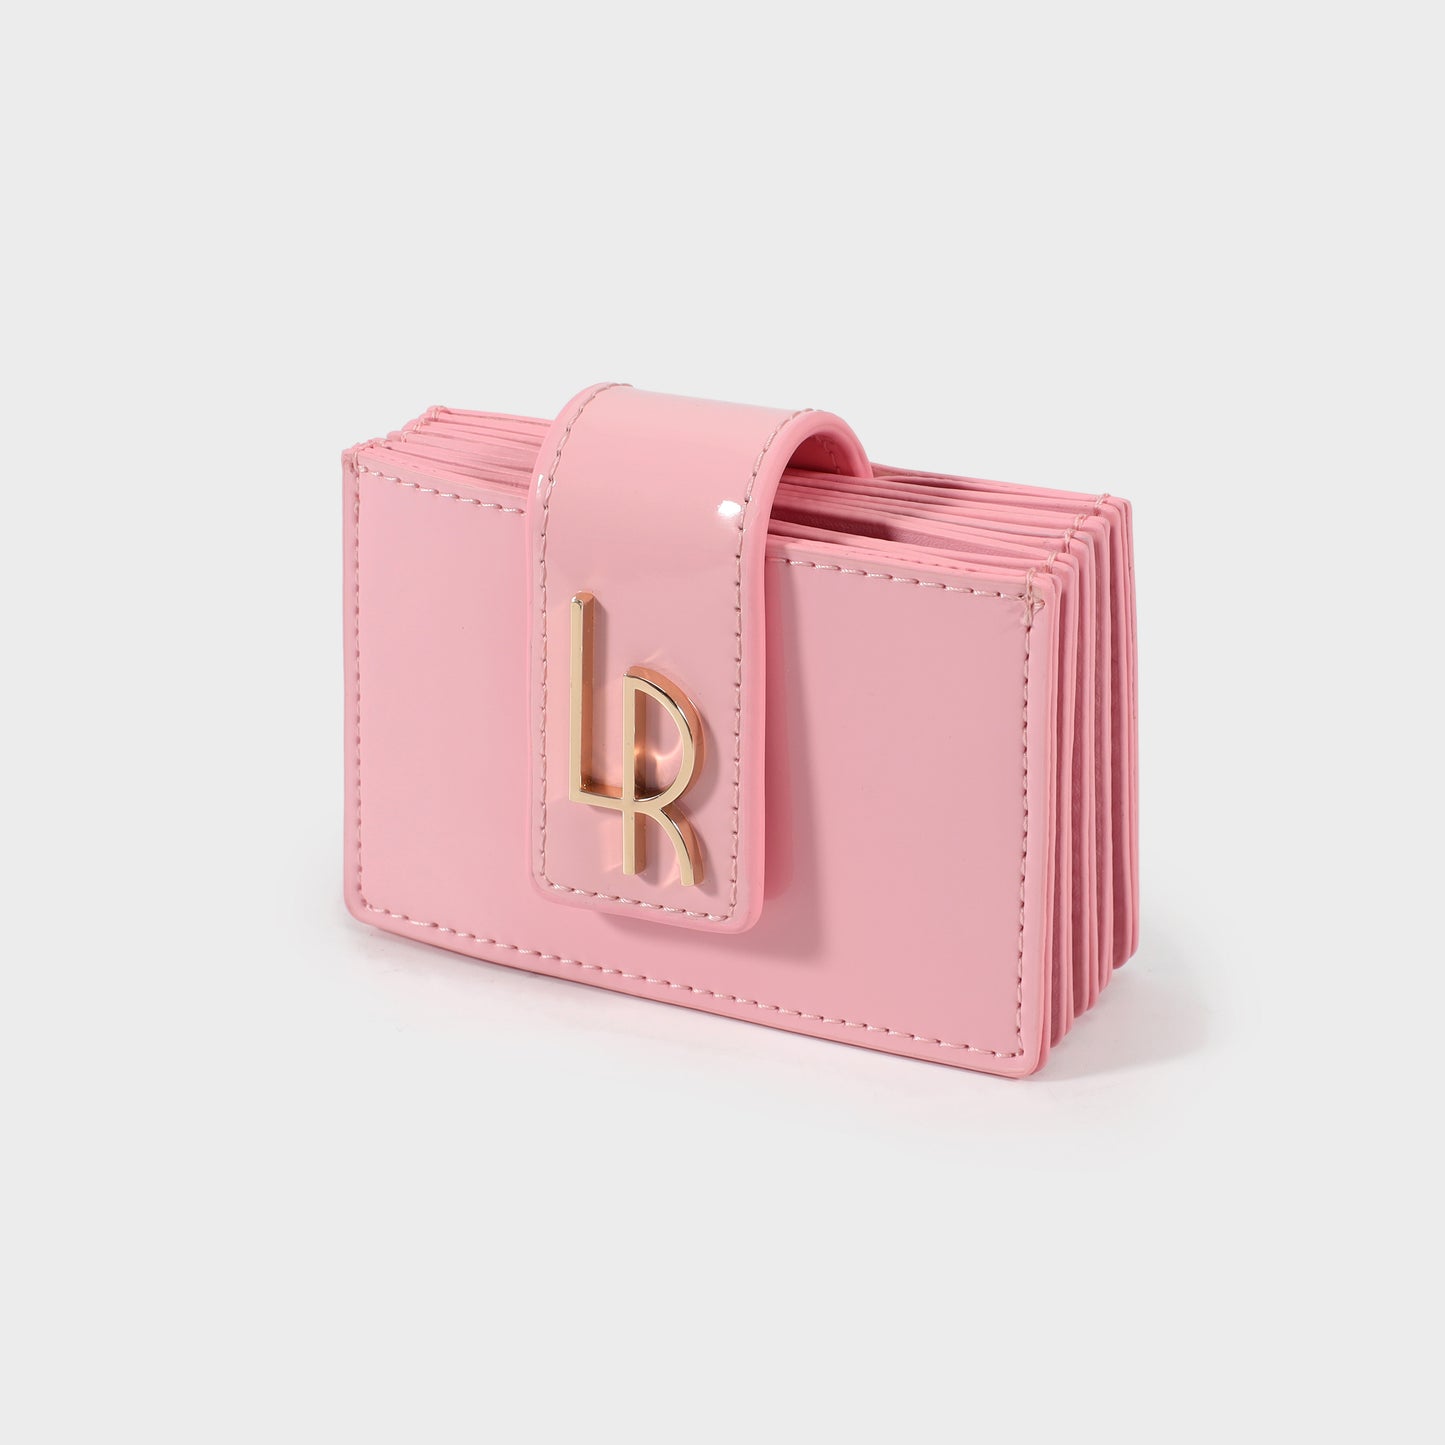 ROSE WALLET 30.05 LE-PINK BABY